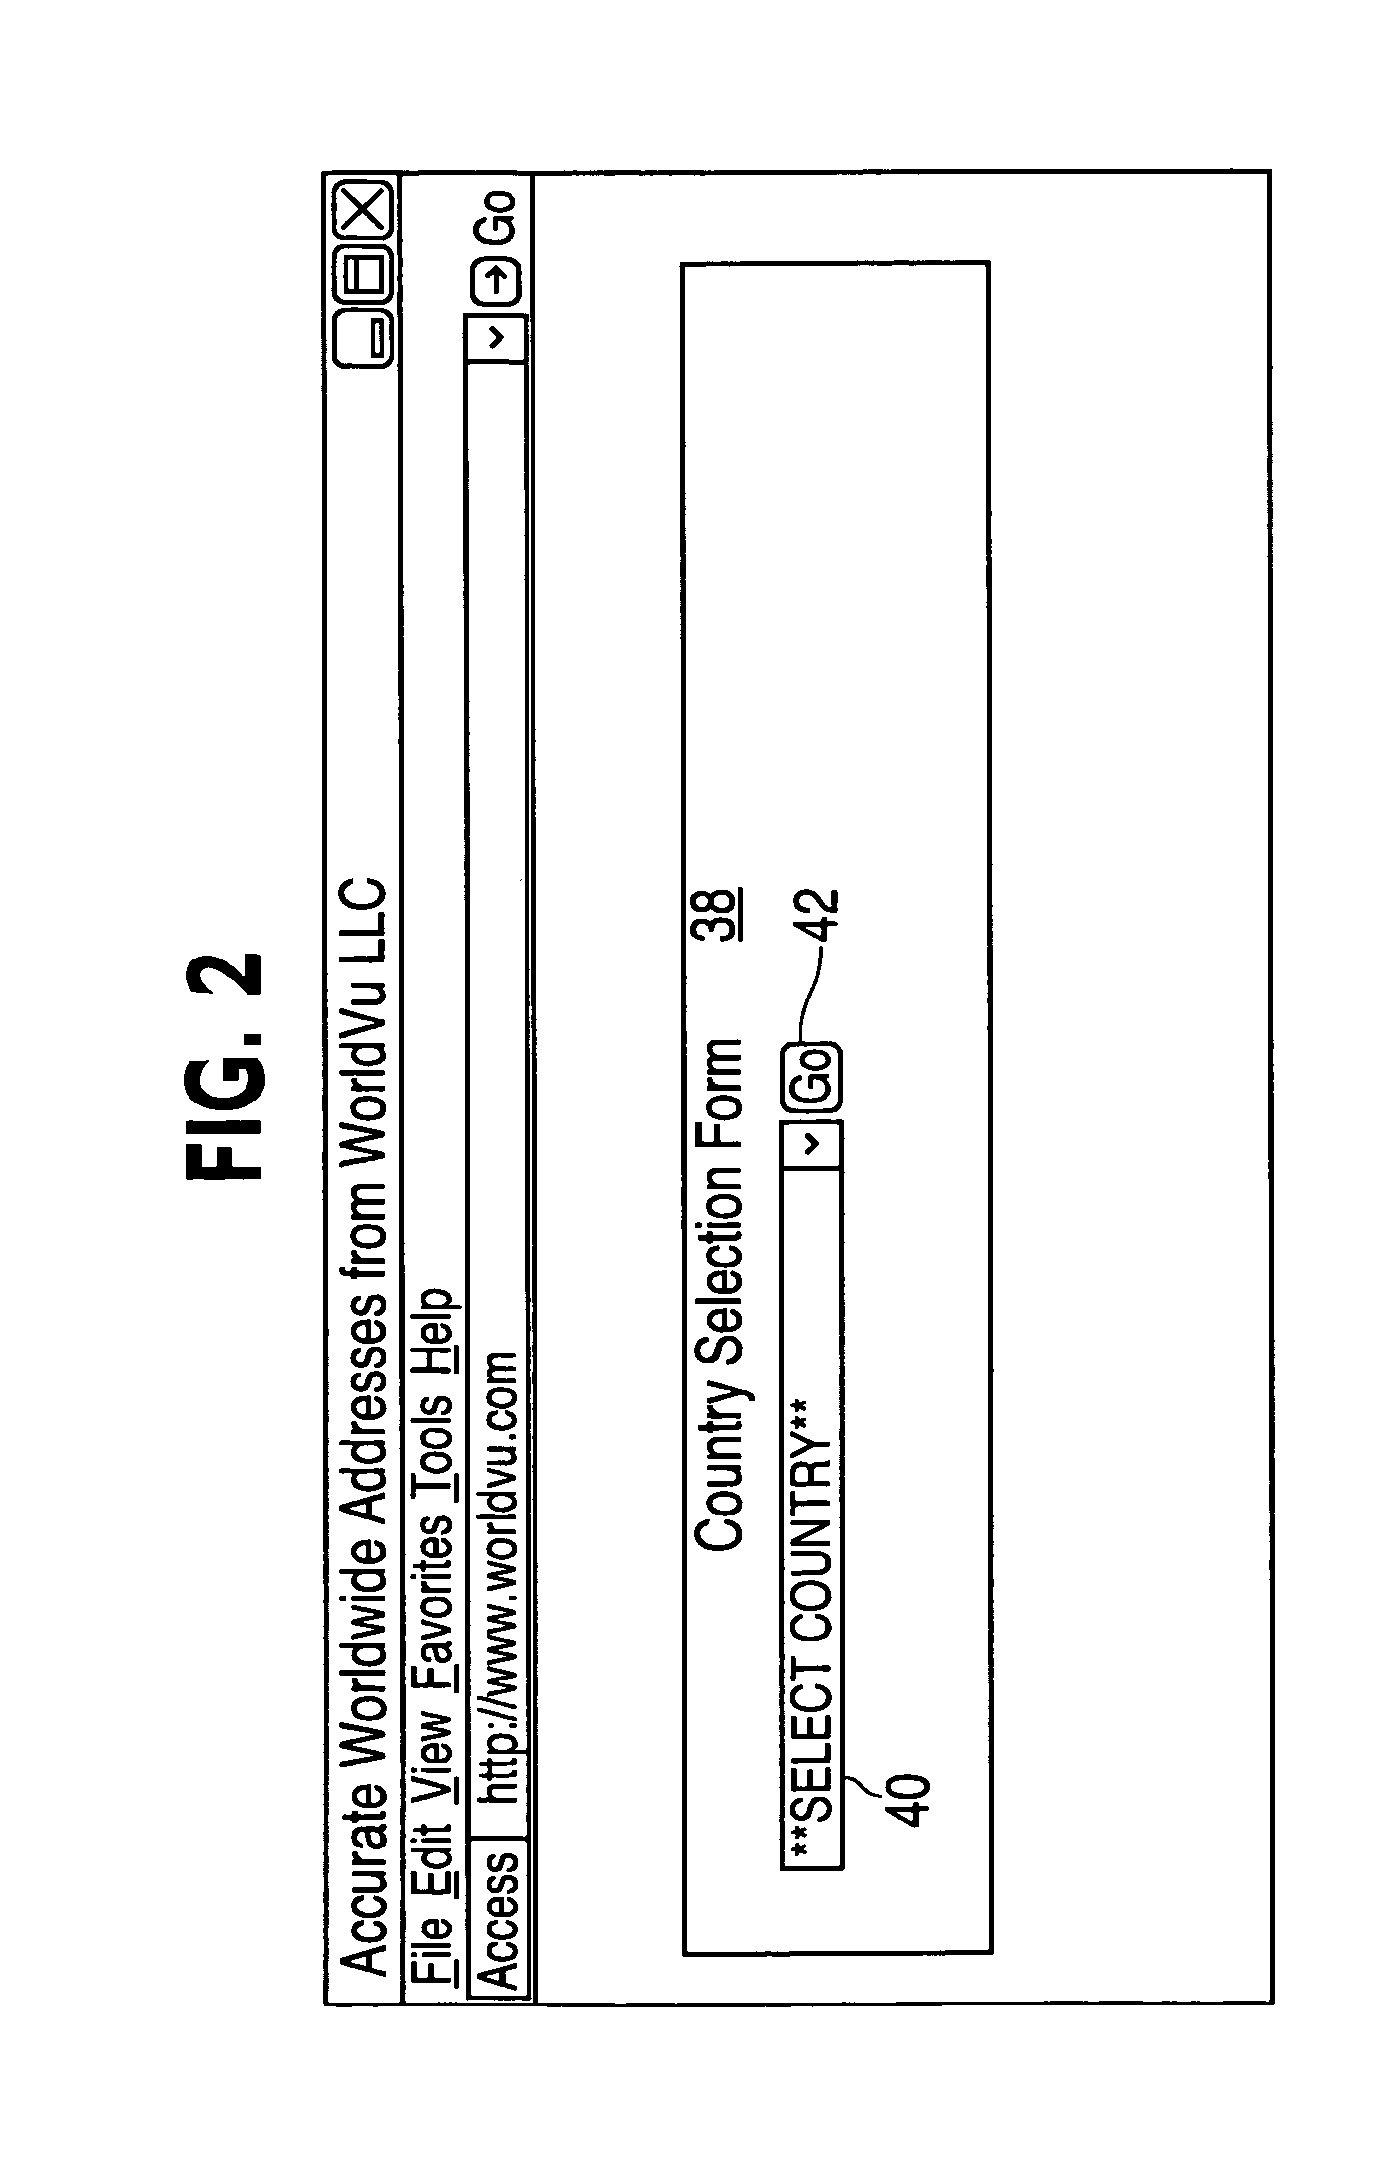 Address data collection and formatting apparatus and method for worldwide address formats